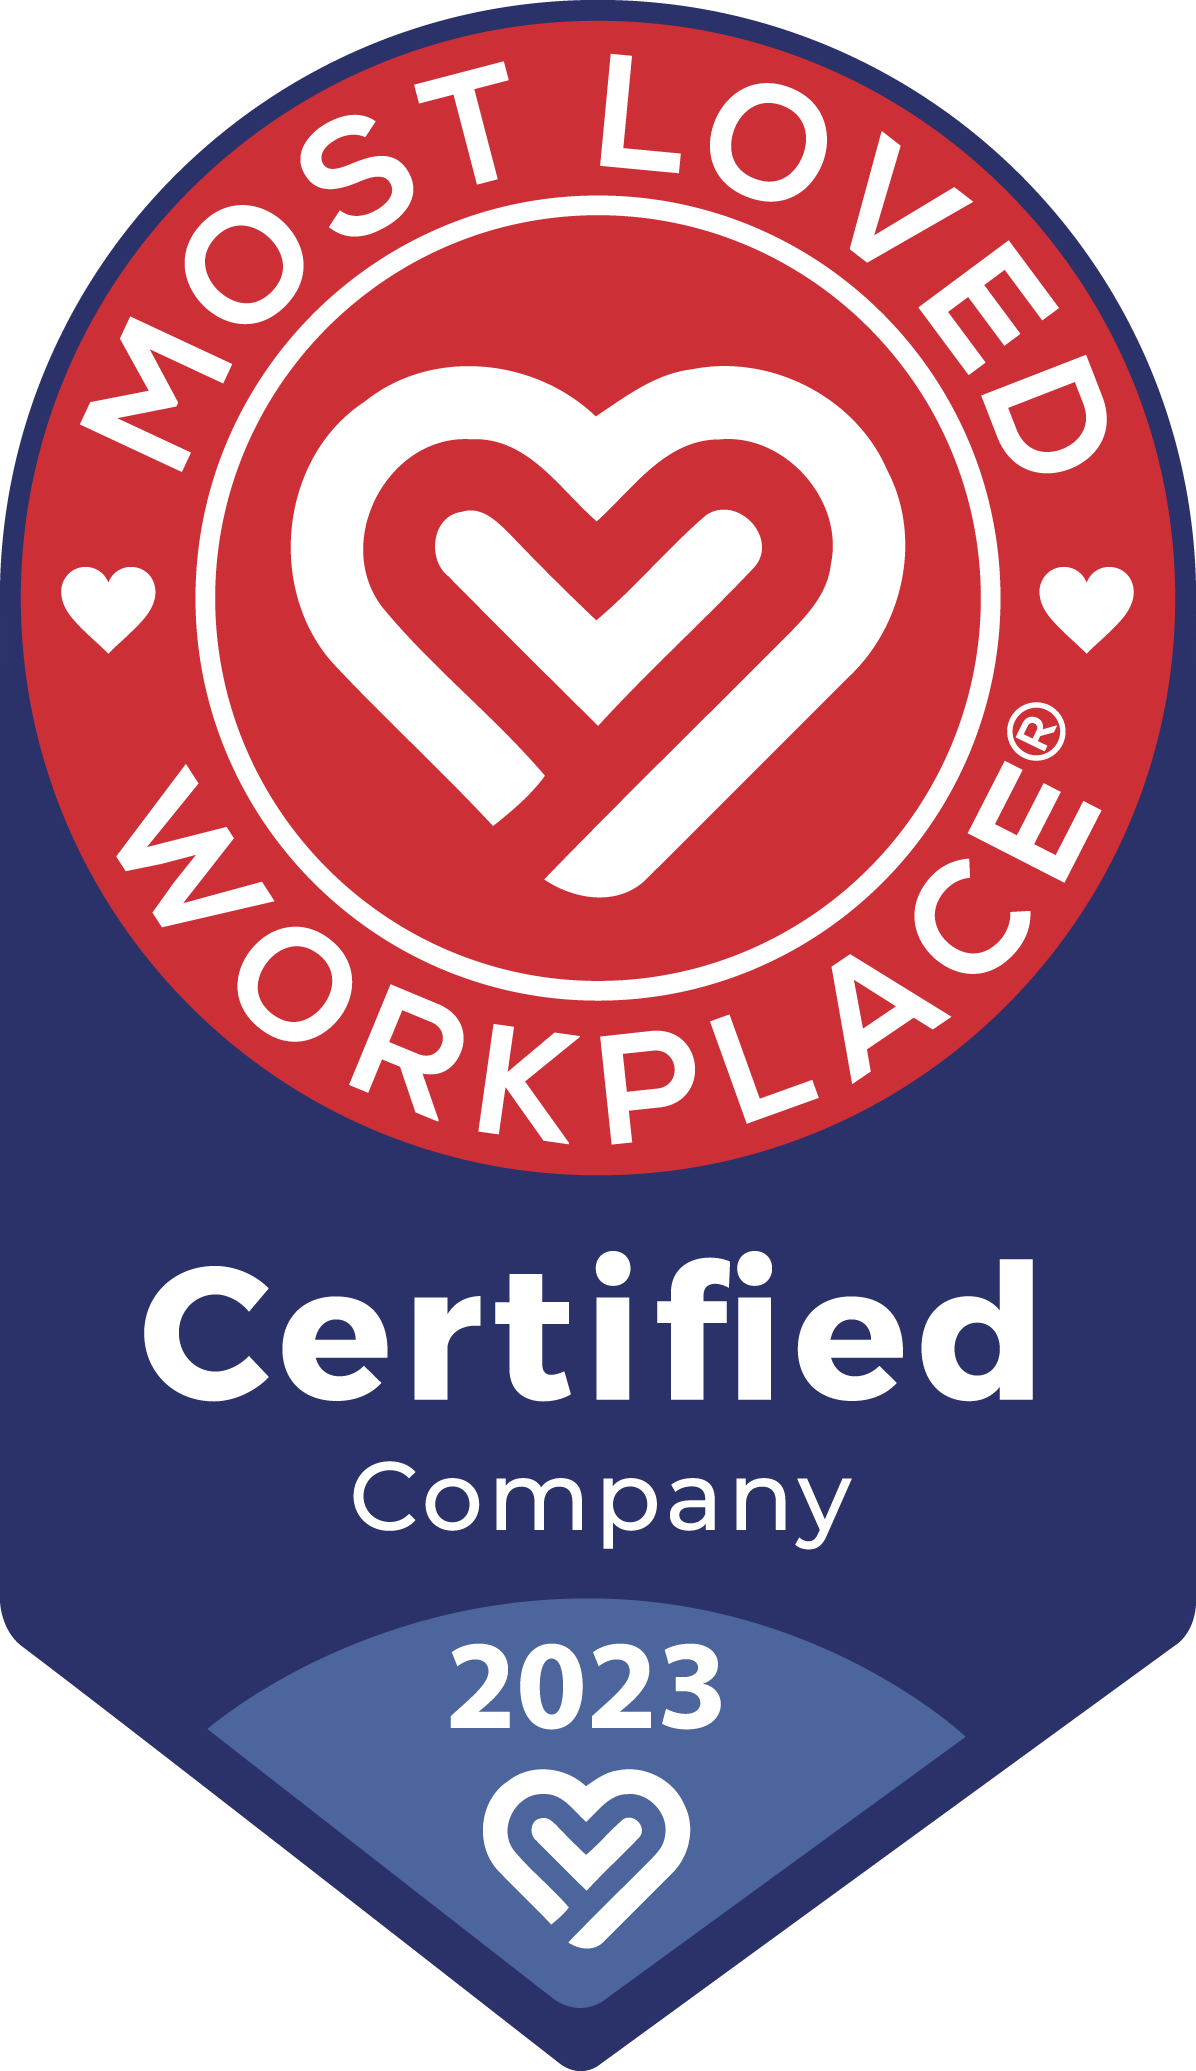 AmeriHealth Caritas became certified as a Most Loved Workplace in 2023 based on our scores on the Love of Workplace Index™